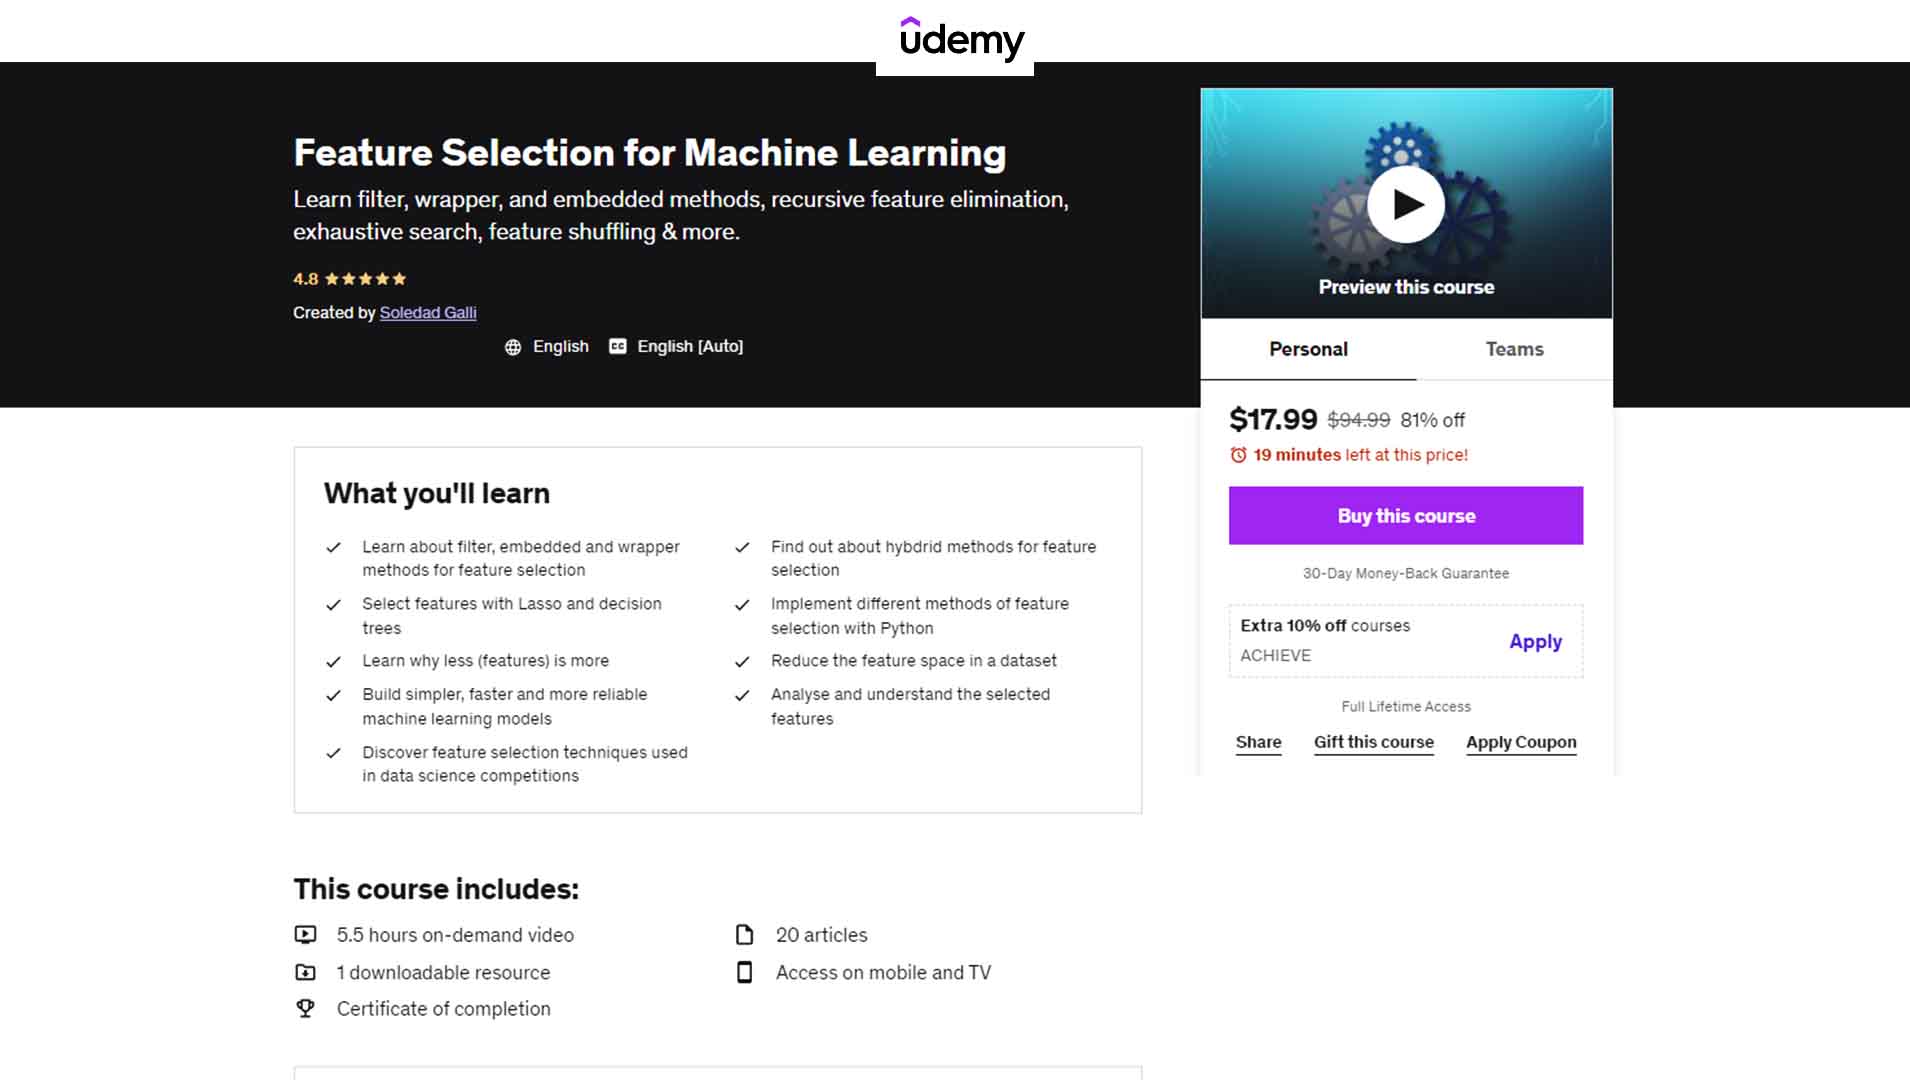 Feature Selection for Machine Learning